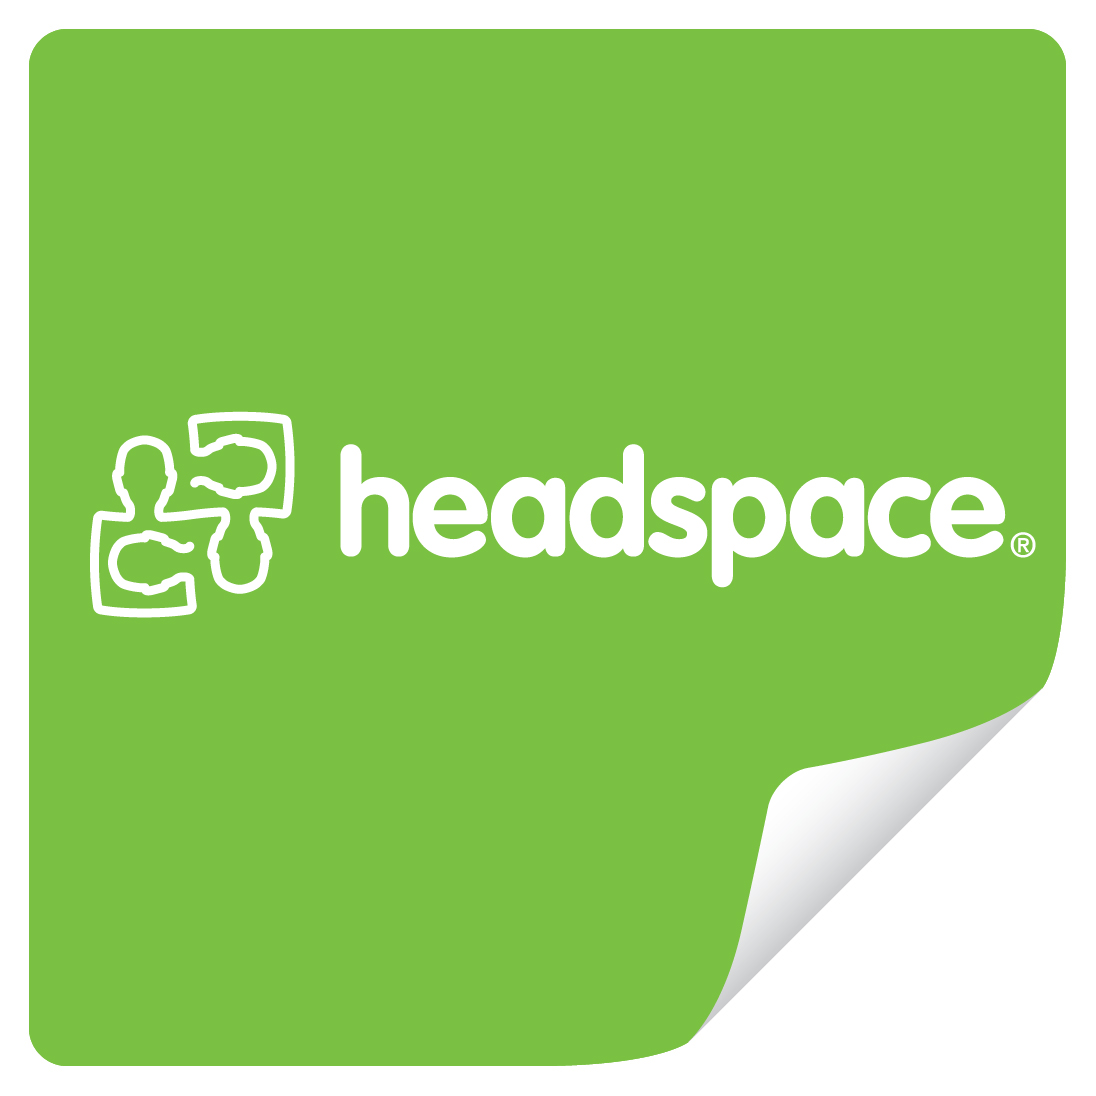 Headspace Appoints New CEO